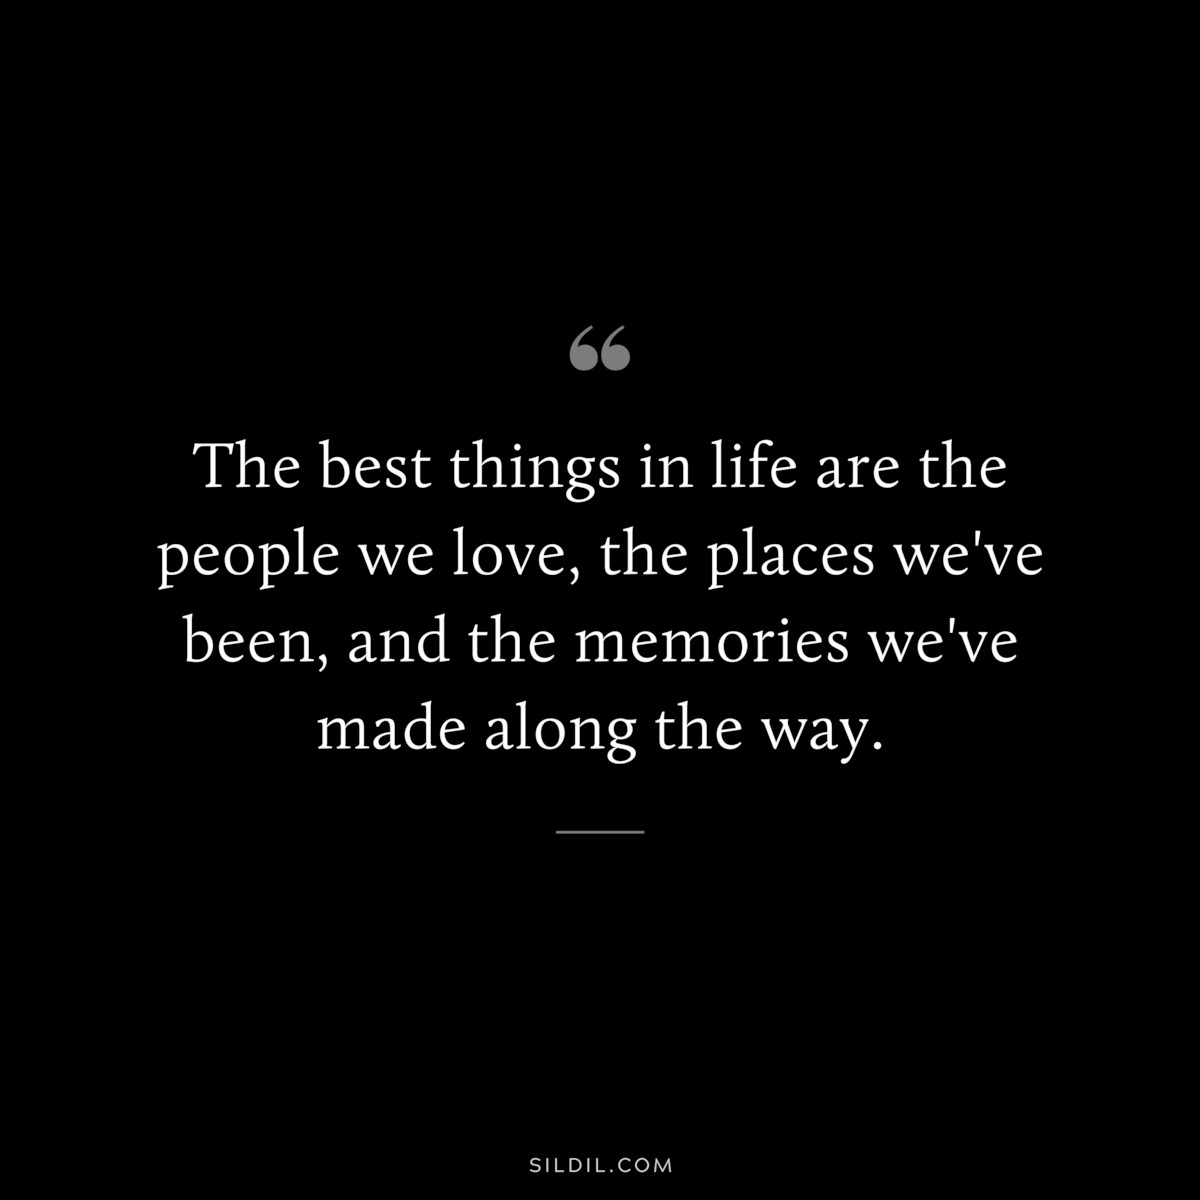 The best things in life are the people we love, the places we've been, and the memories we've made along the way.